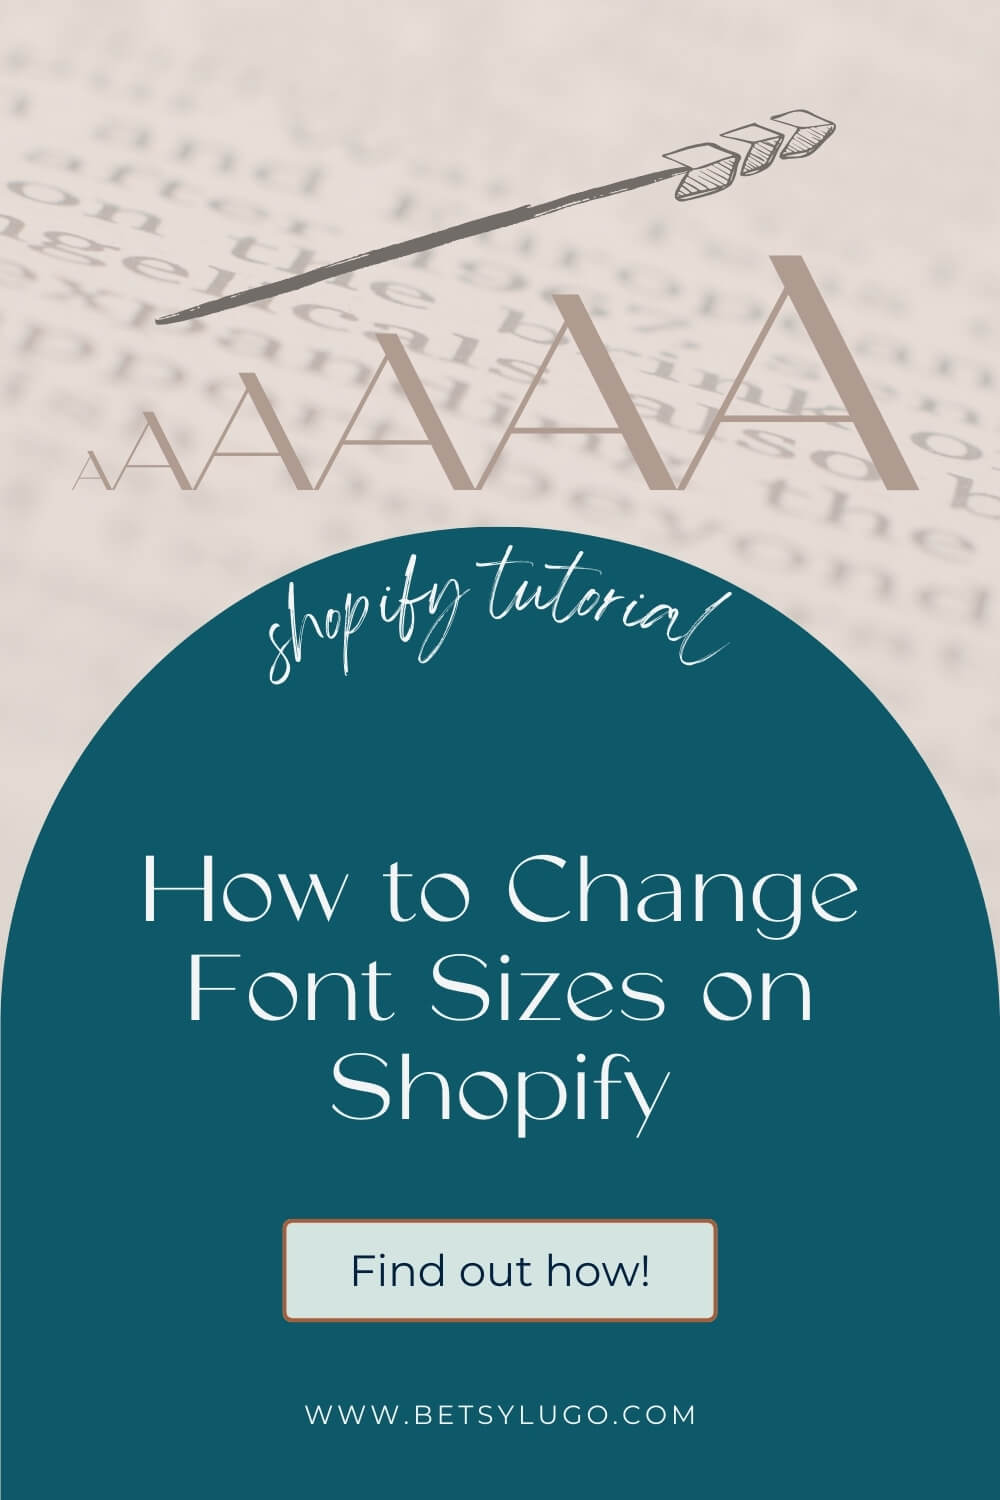 How to change font sizes on Shopify- Pinterest Pin